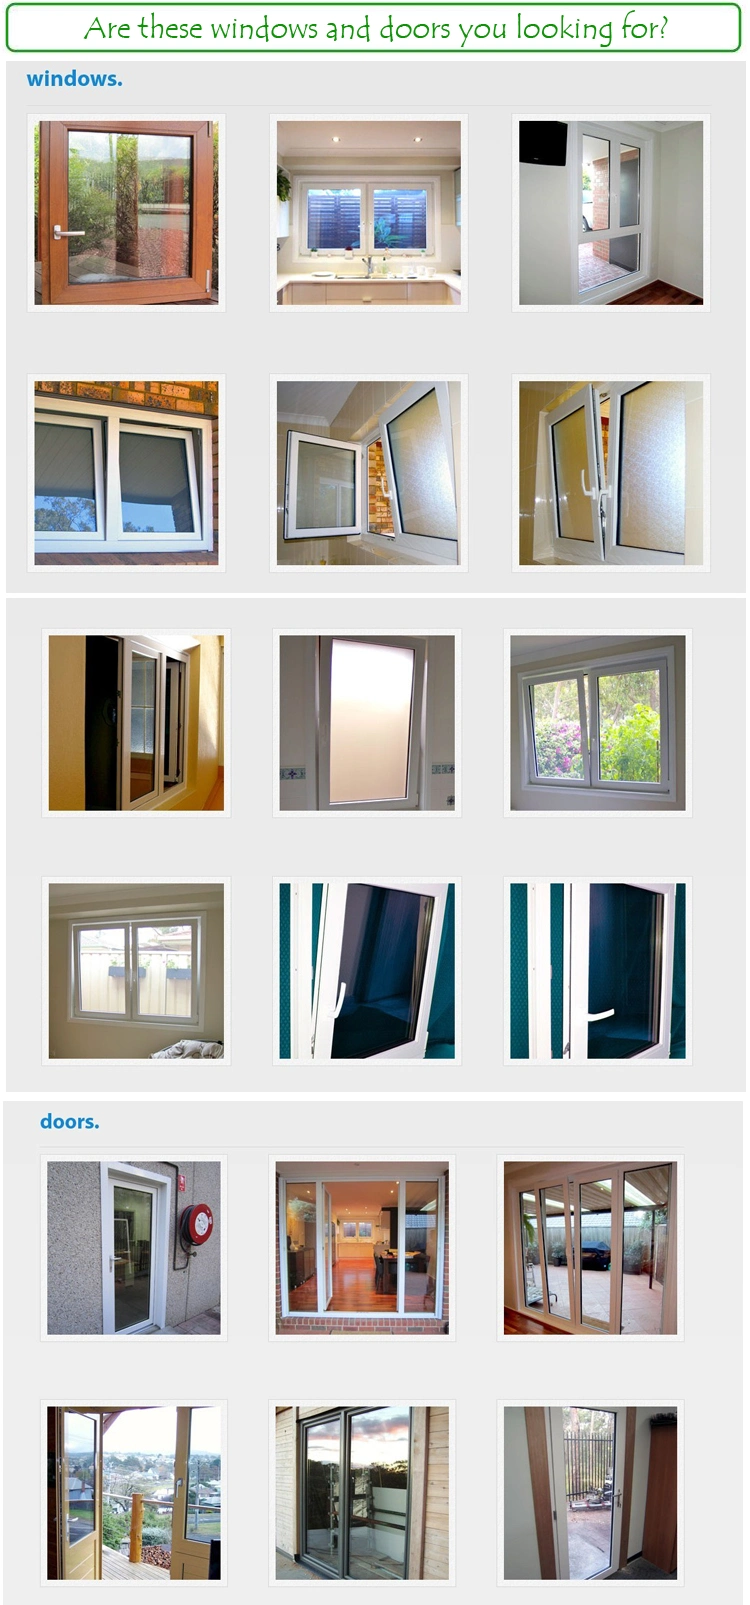 Customized Size Solid Wood Clad Thermal Break Aluminum Bay & Bow Window